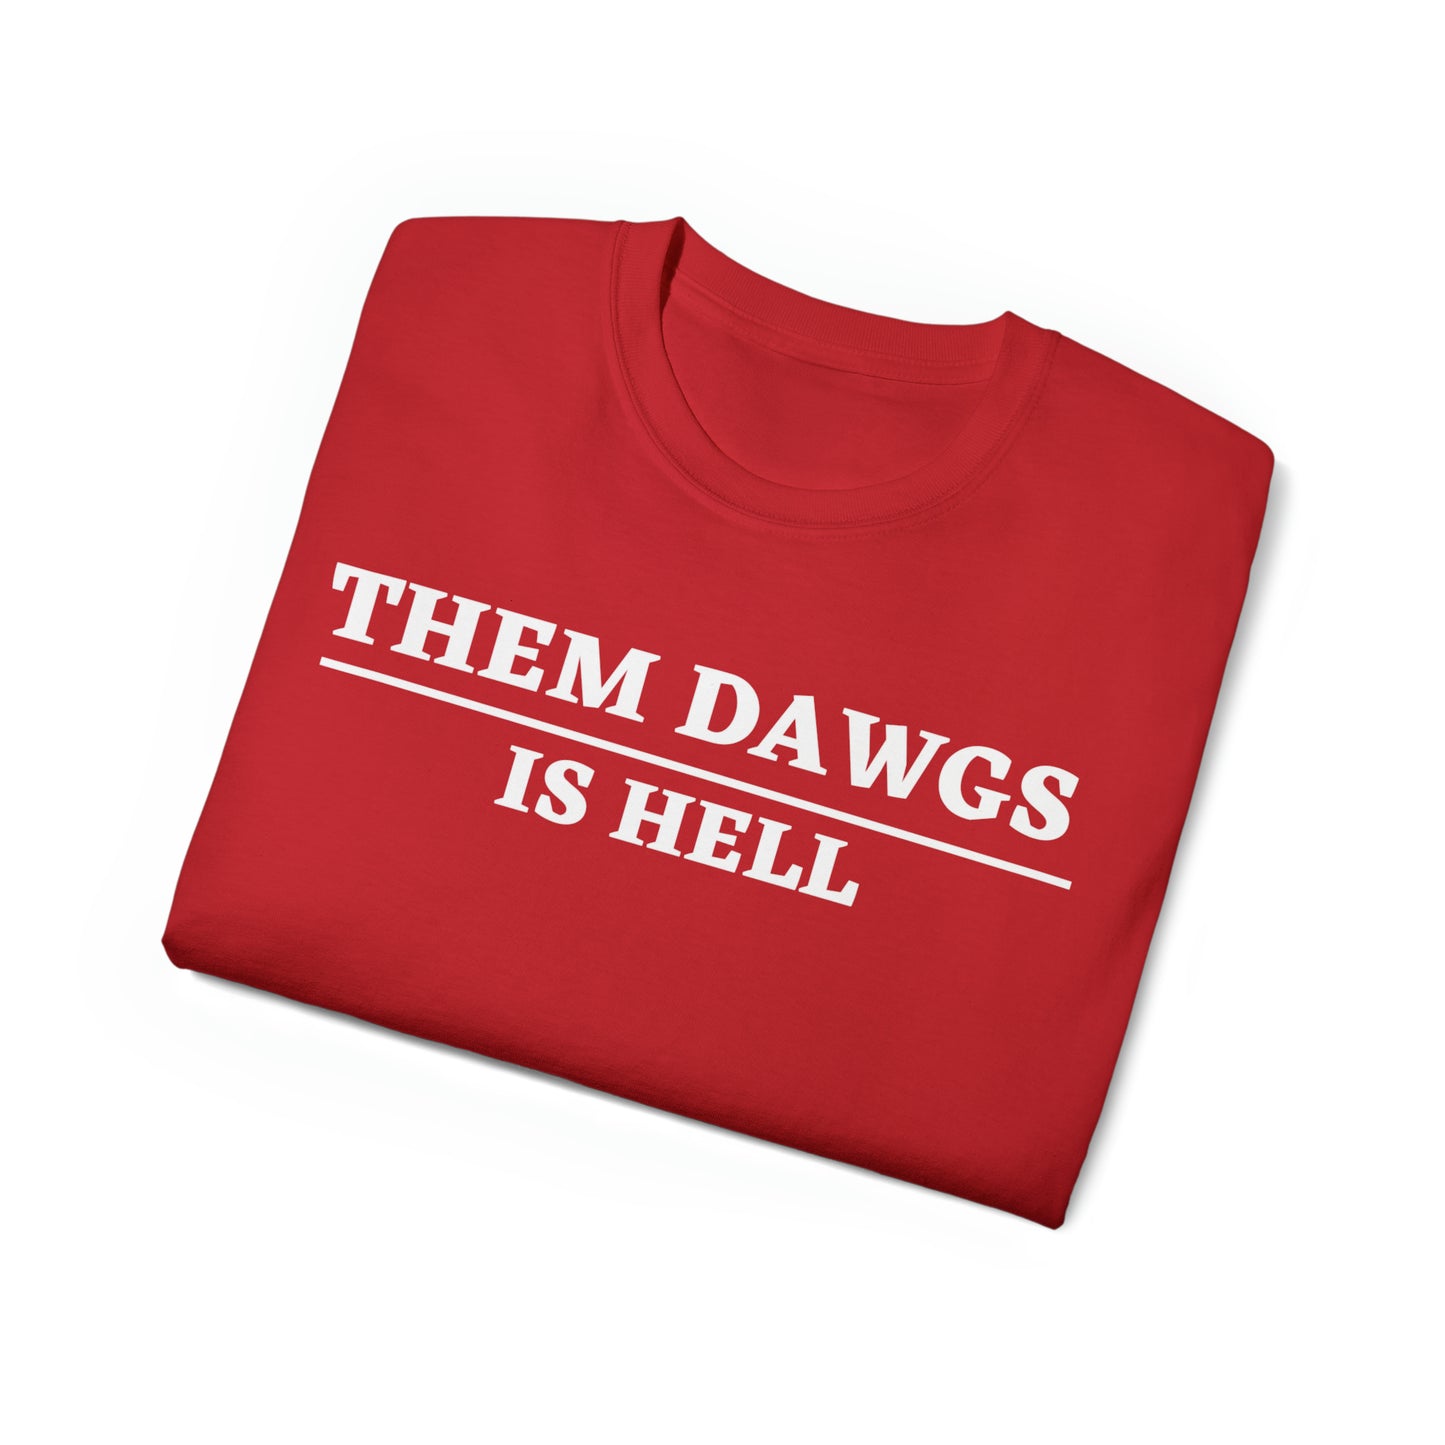 Them Dawgs is Hell Red T-Shirt